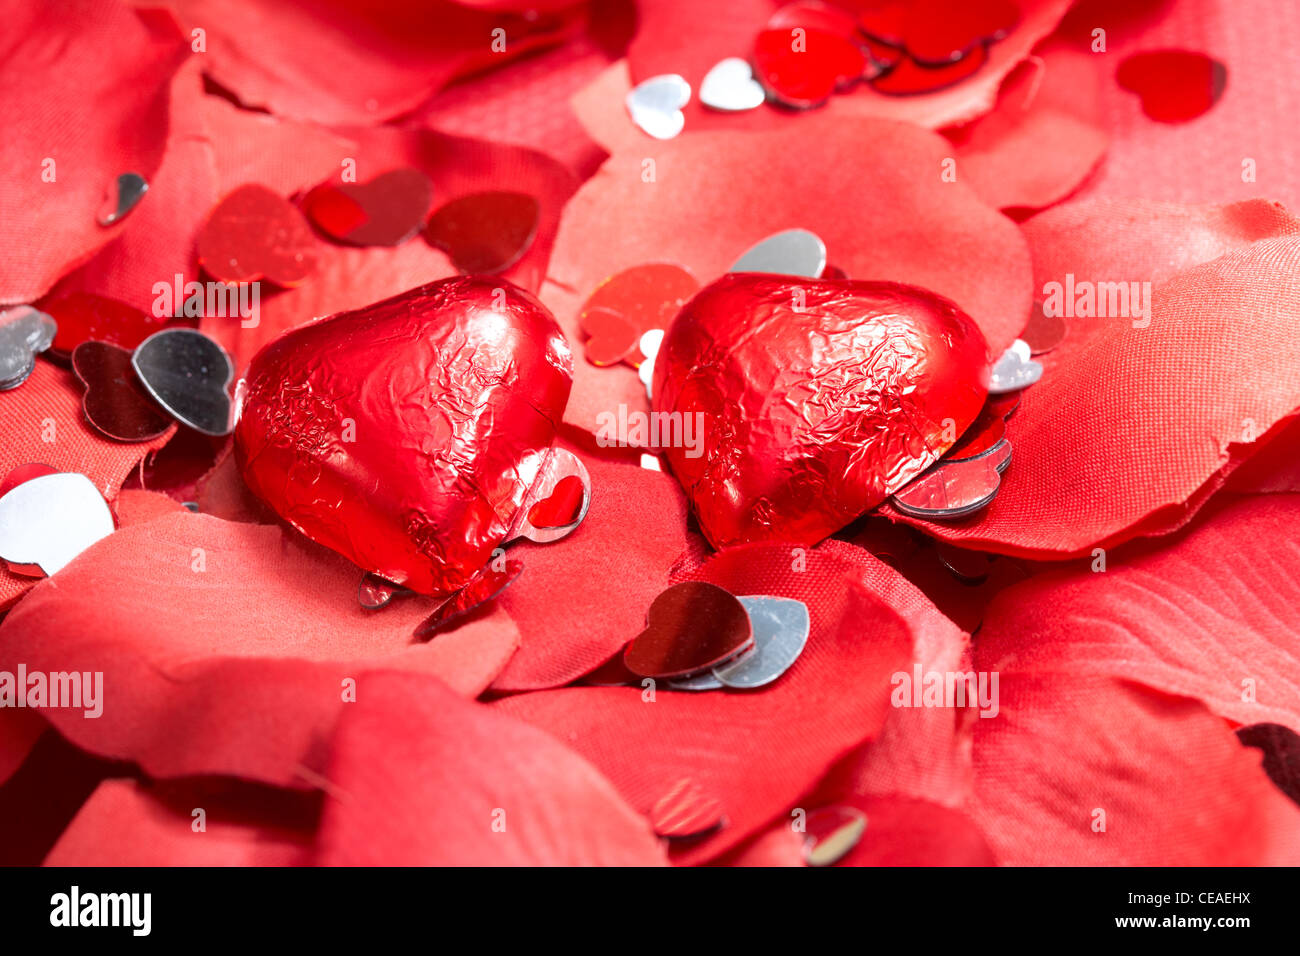 chocolate hearts on fake red petals with heart decorations Stock Photo